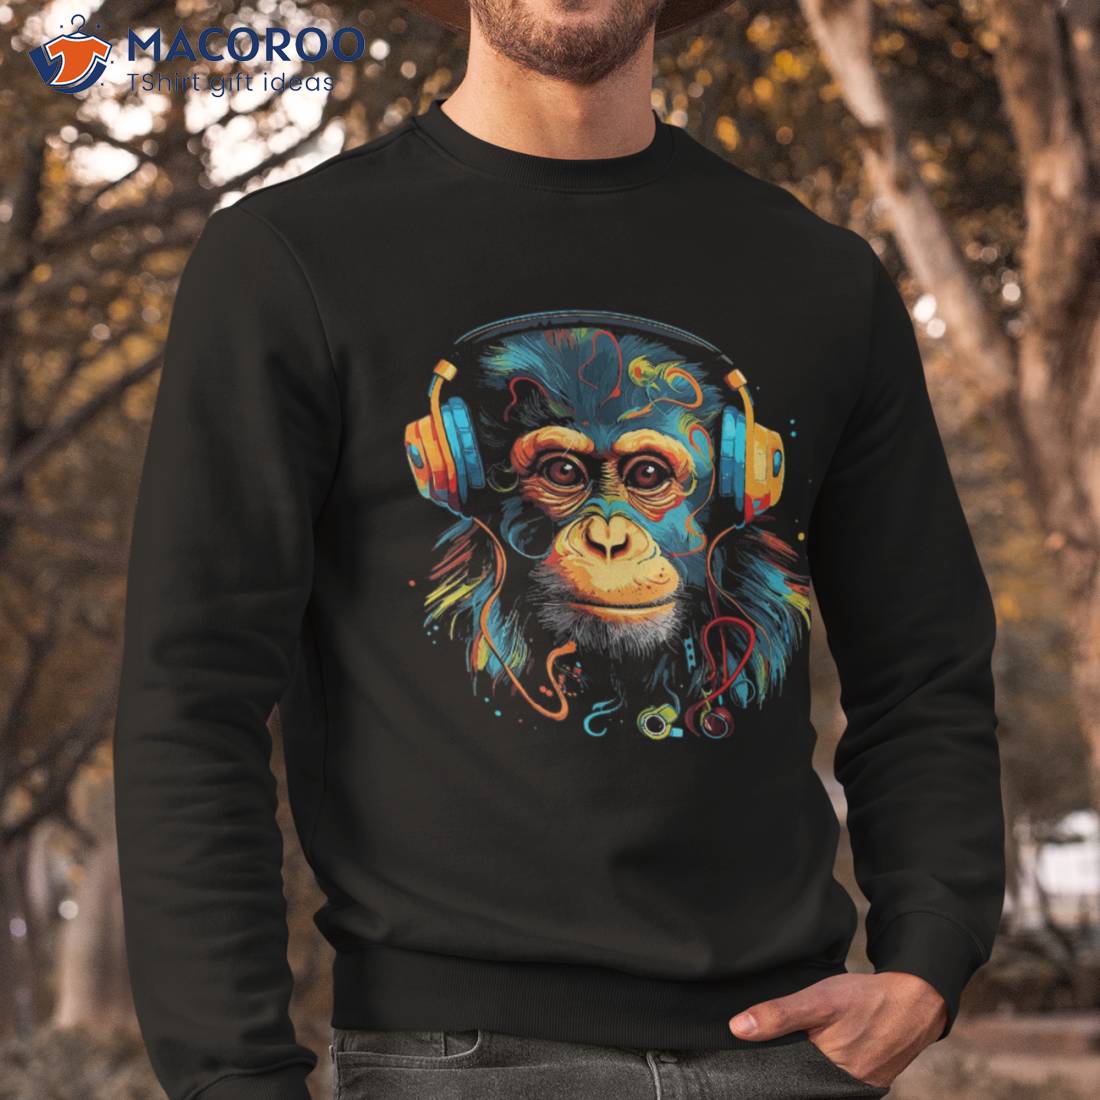 Monkey Ape Wearing Headphones Graphic Tee For And Shirt